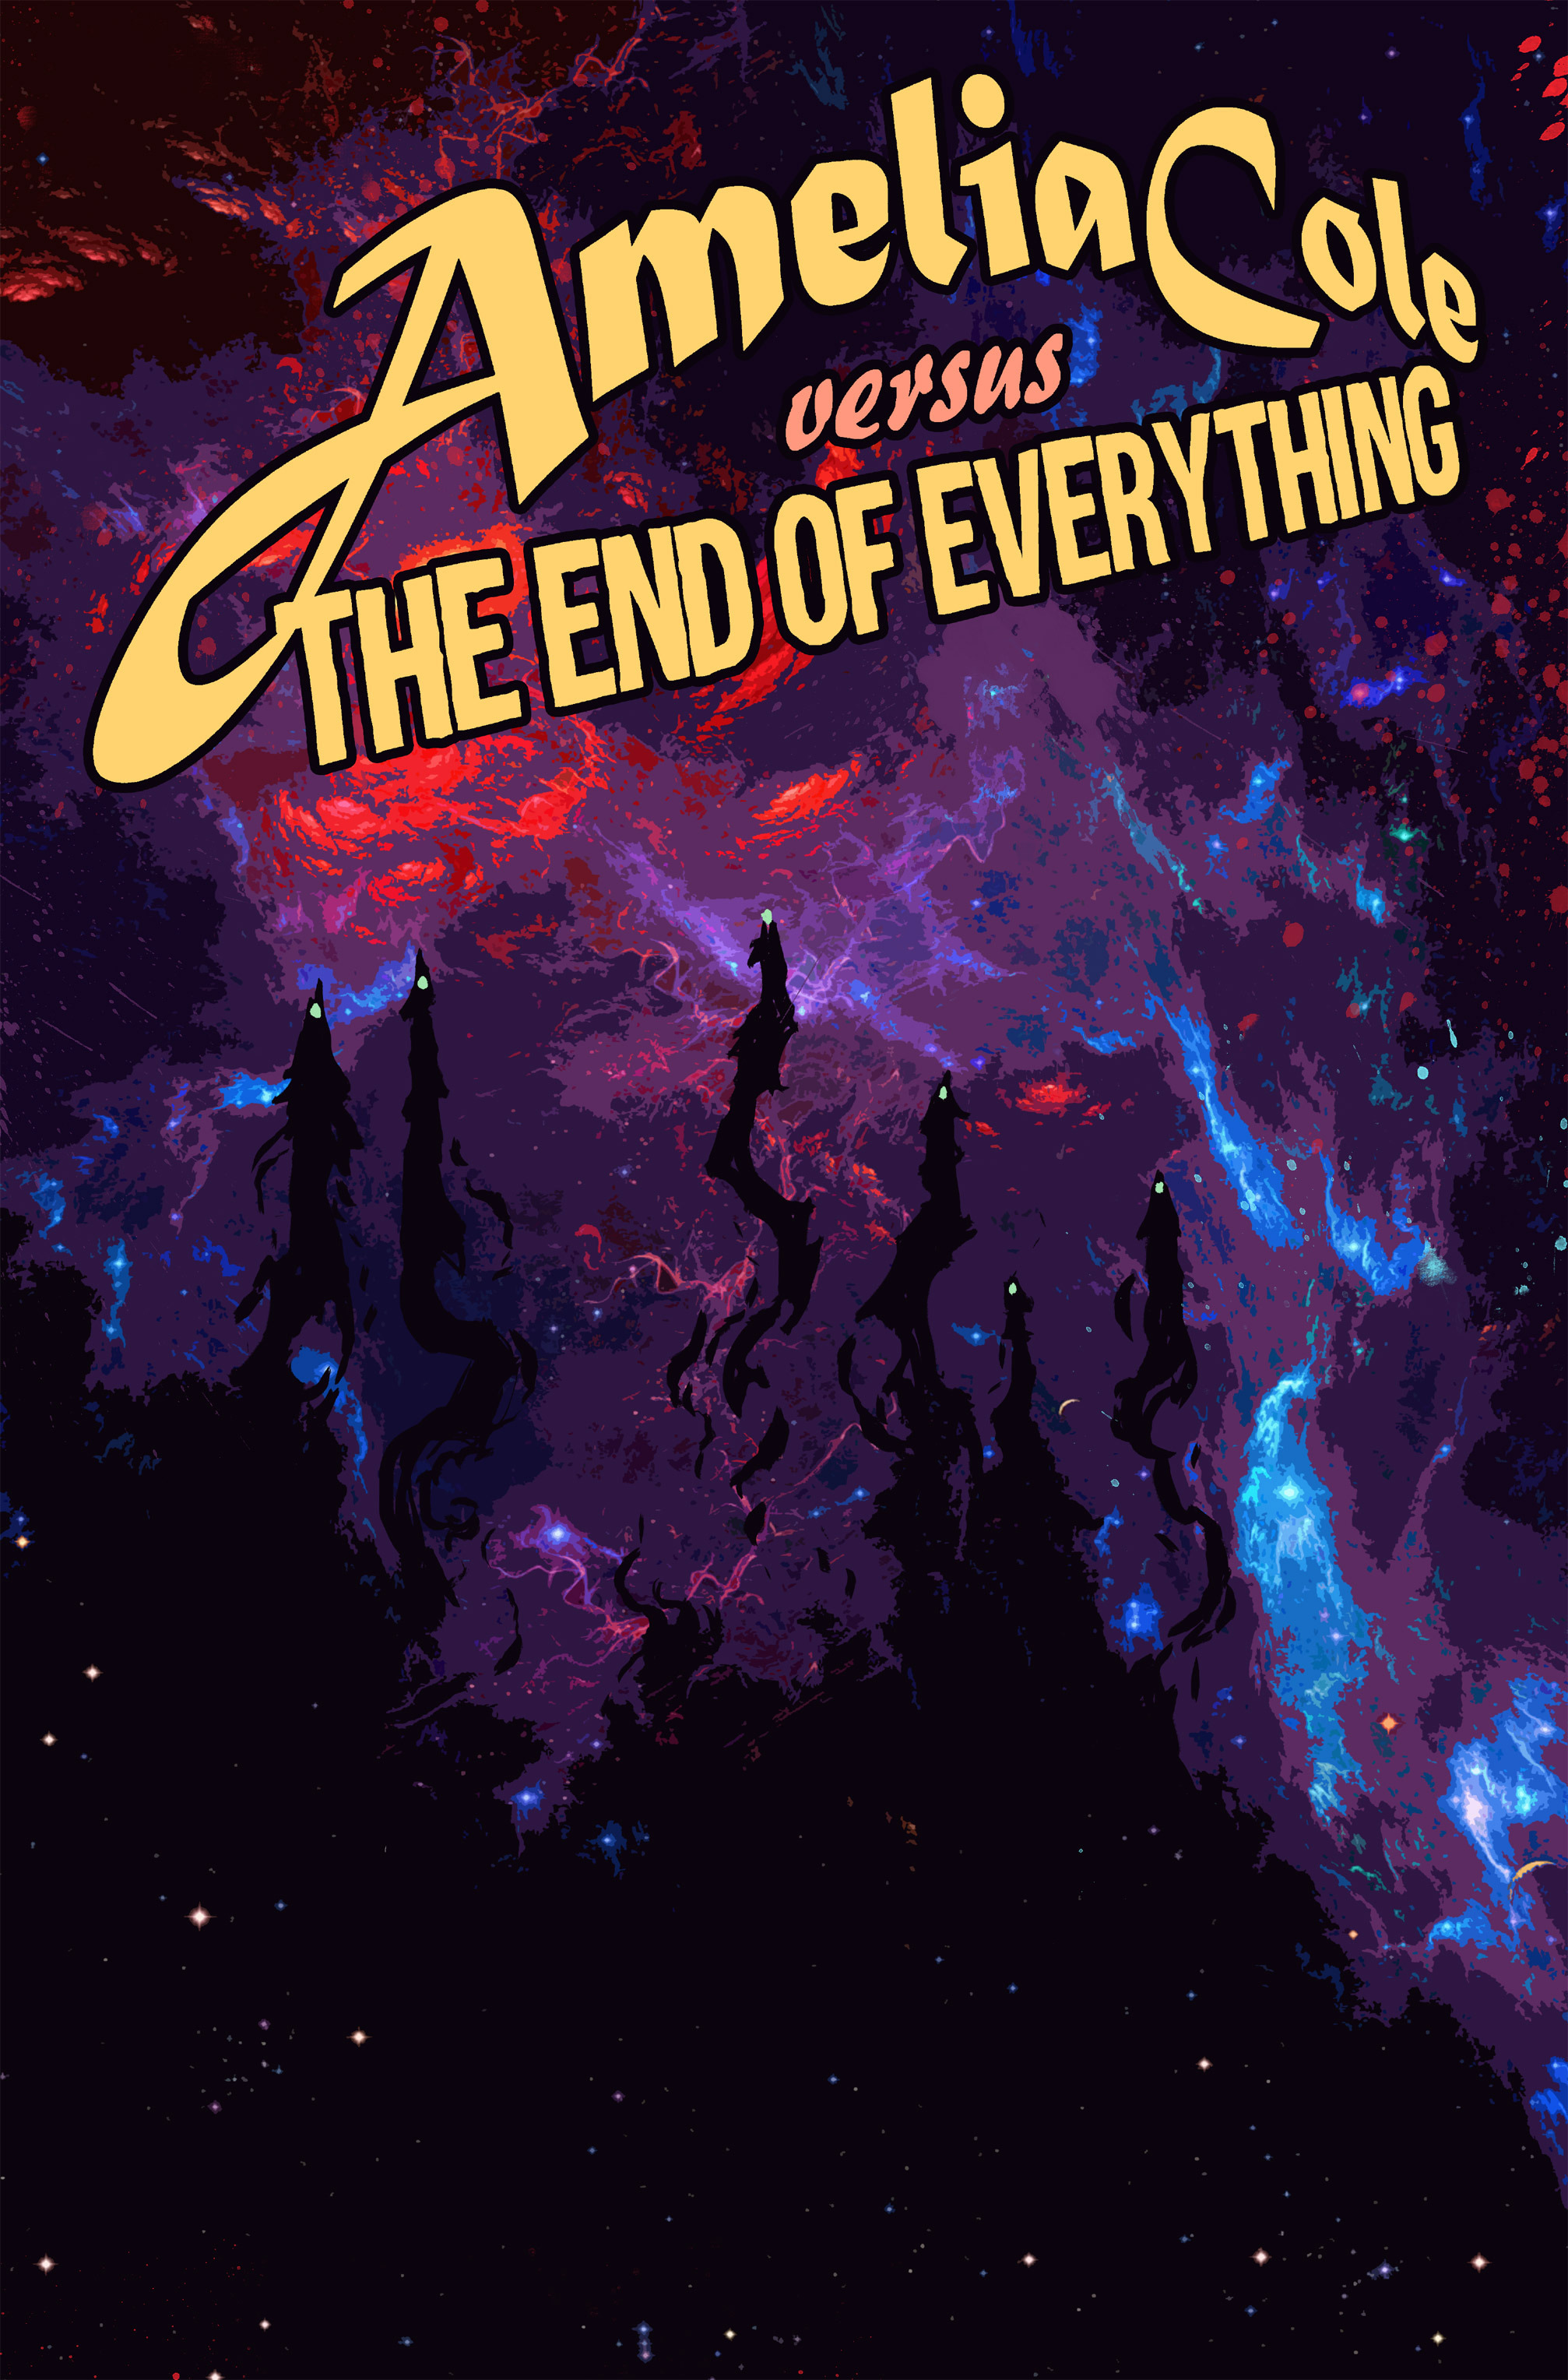 Read online Amelia Cole Versus The End of Everything comic -  Issue #28 - 1